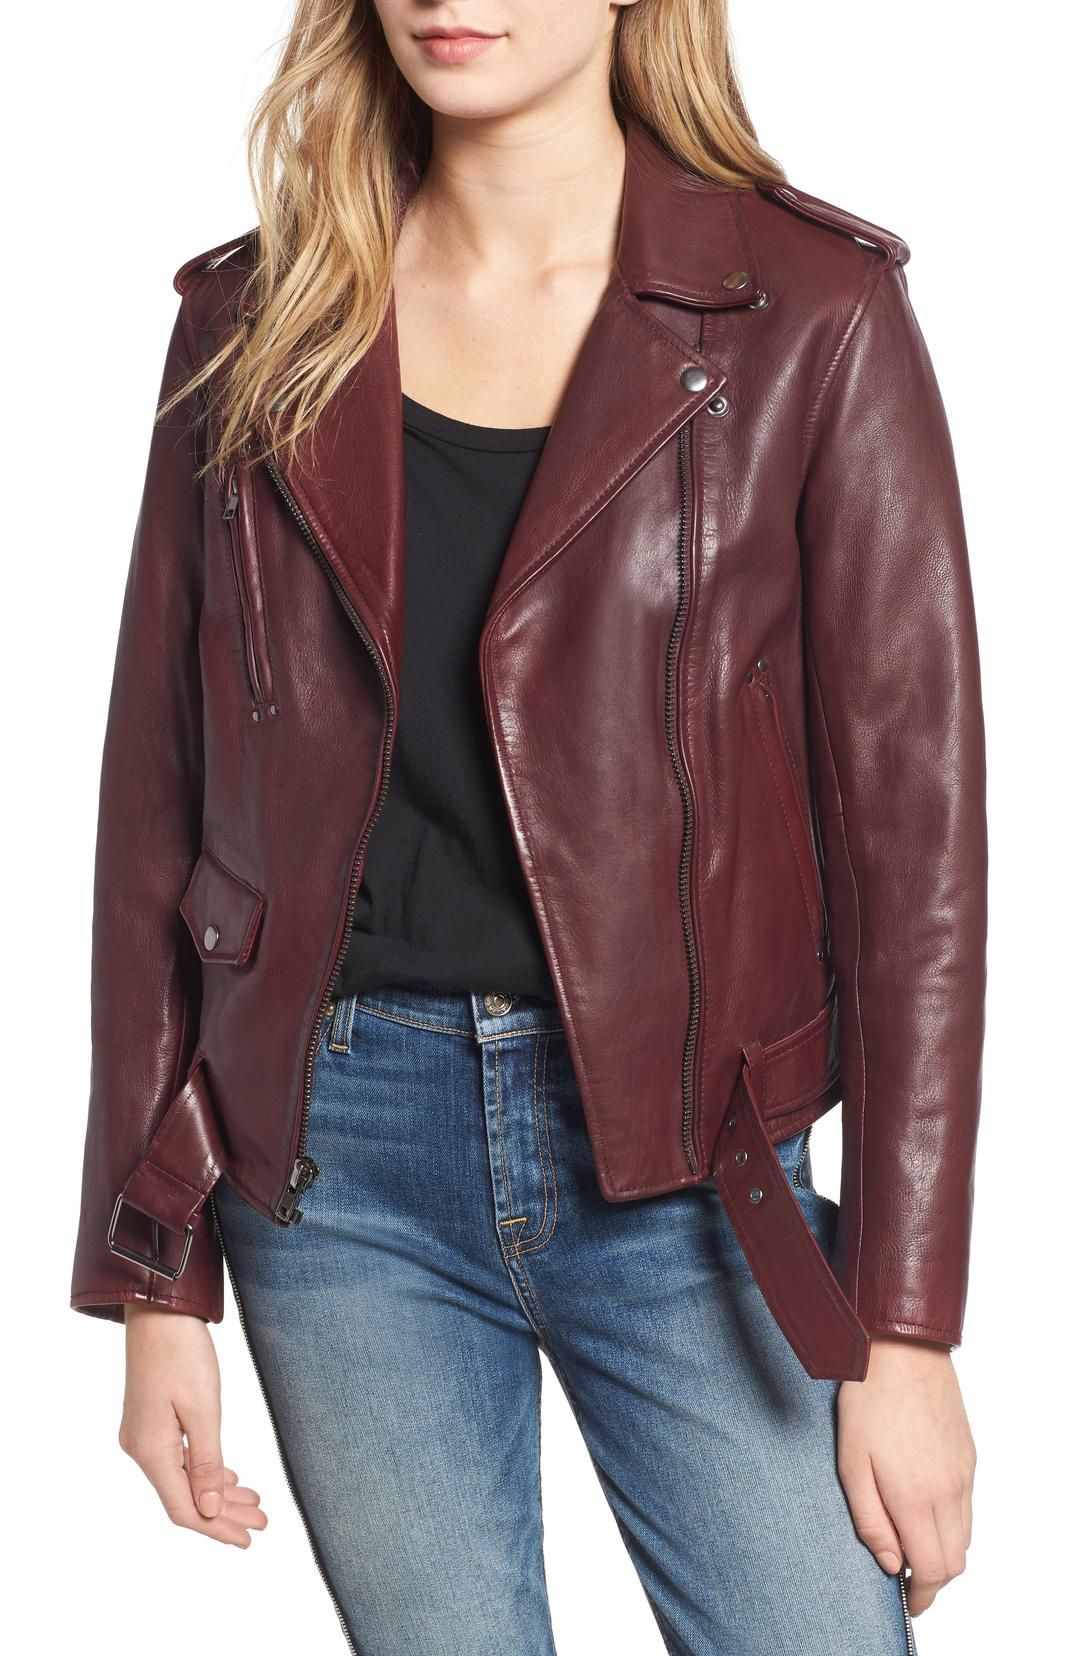 13 Cute Leather Jackets That Aren't Black | Who What Wear